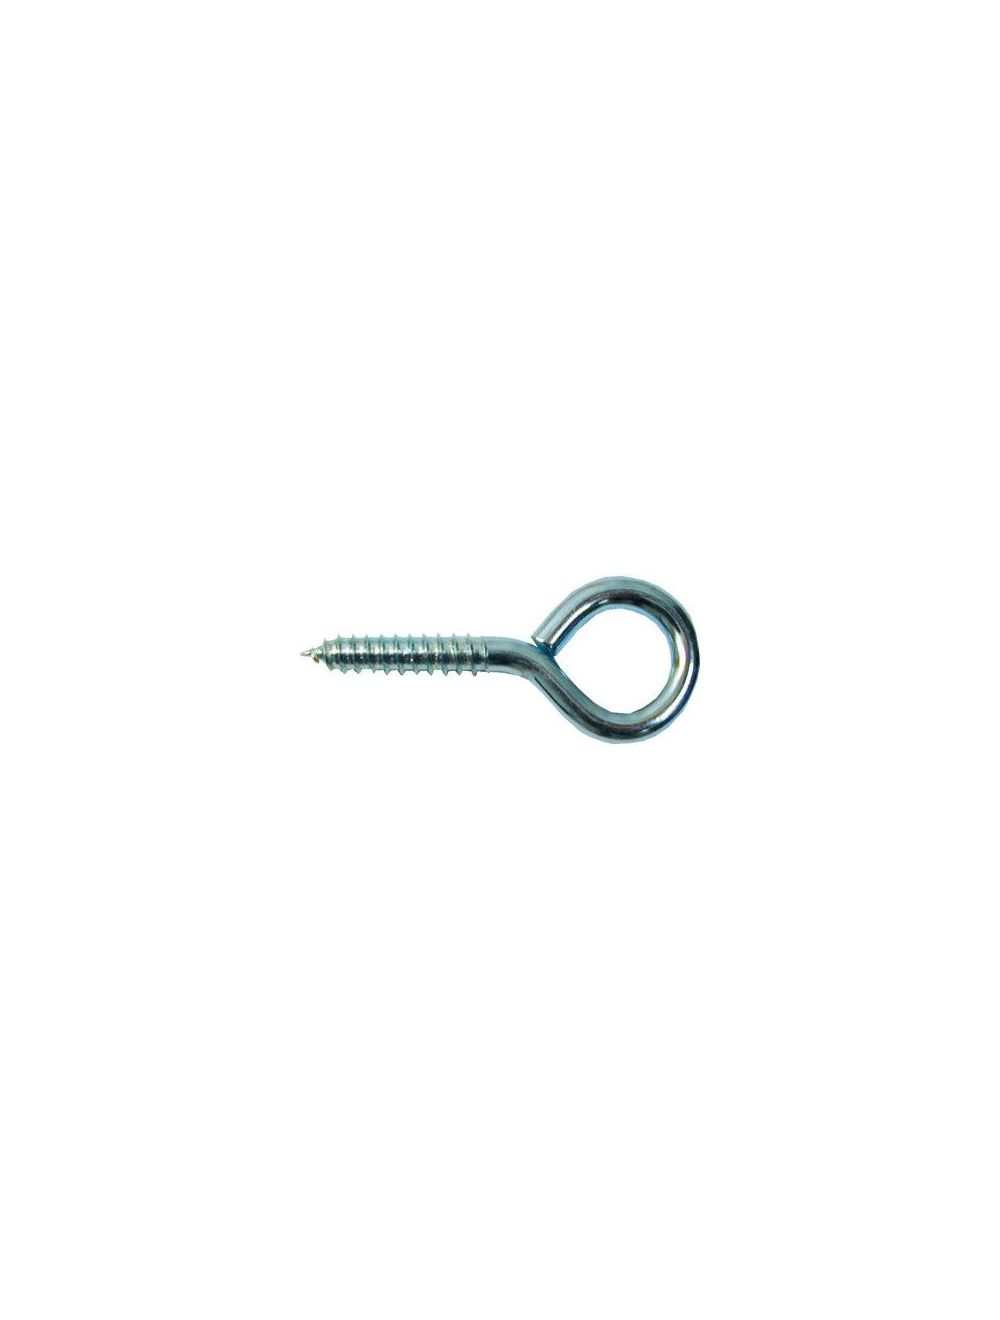 Hindley Zinc Plated Screw Eyes - 15/16 Overall Length - Box/100 -  Paxton/Patterson